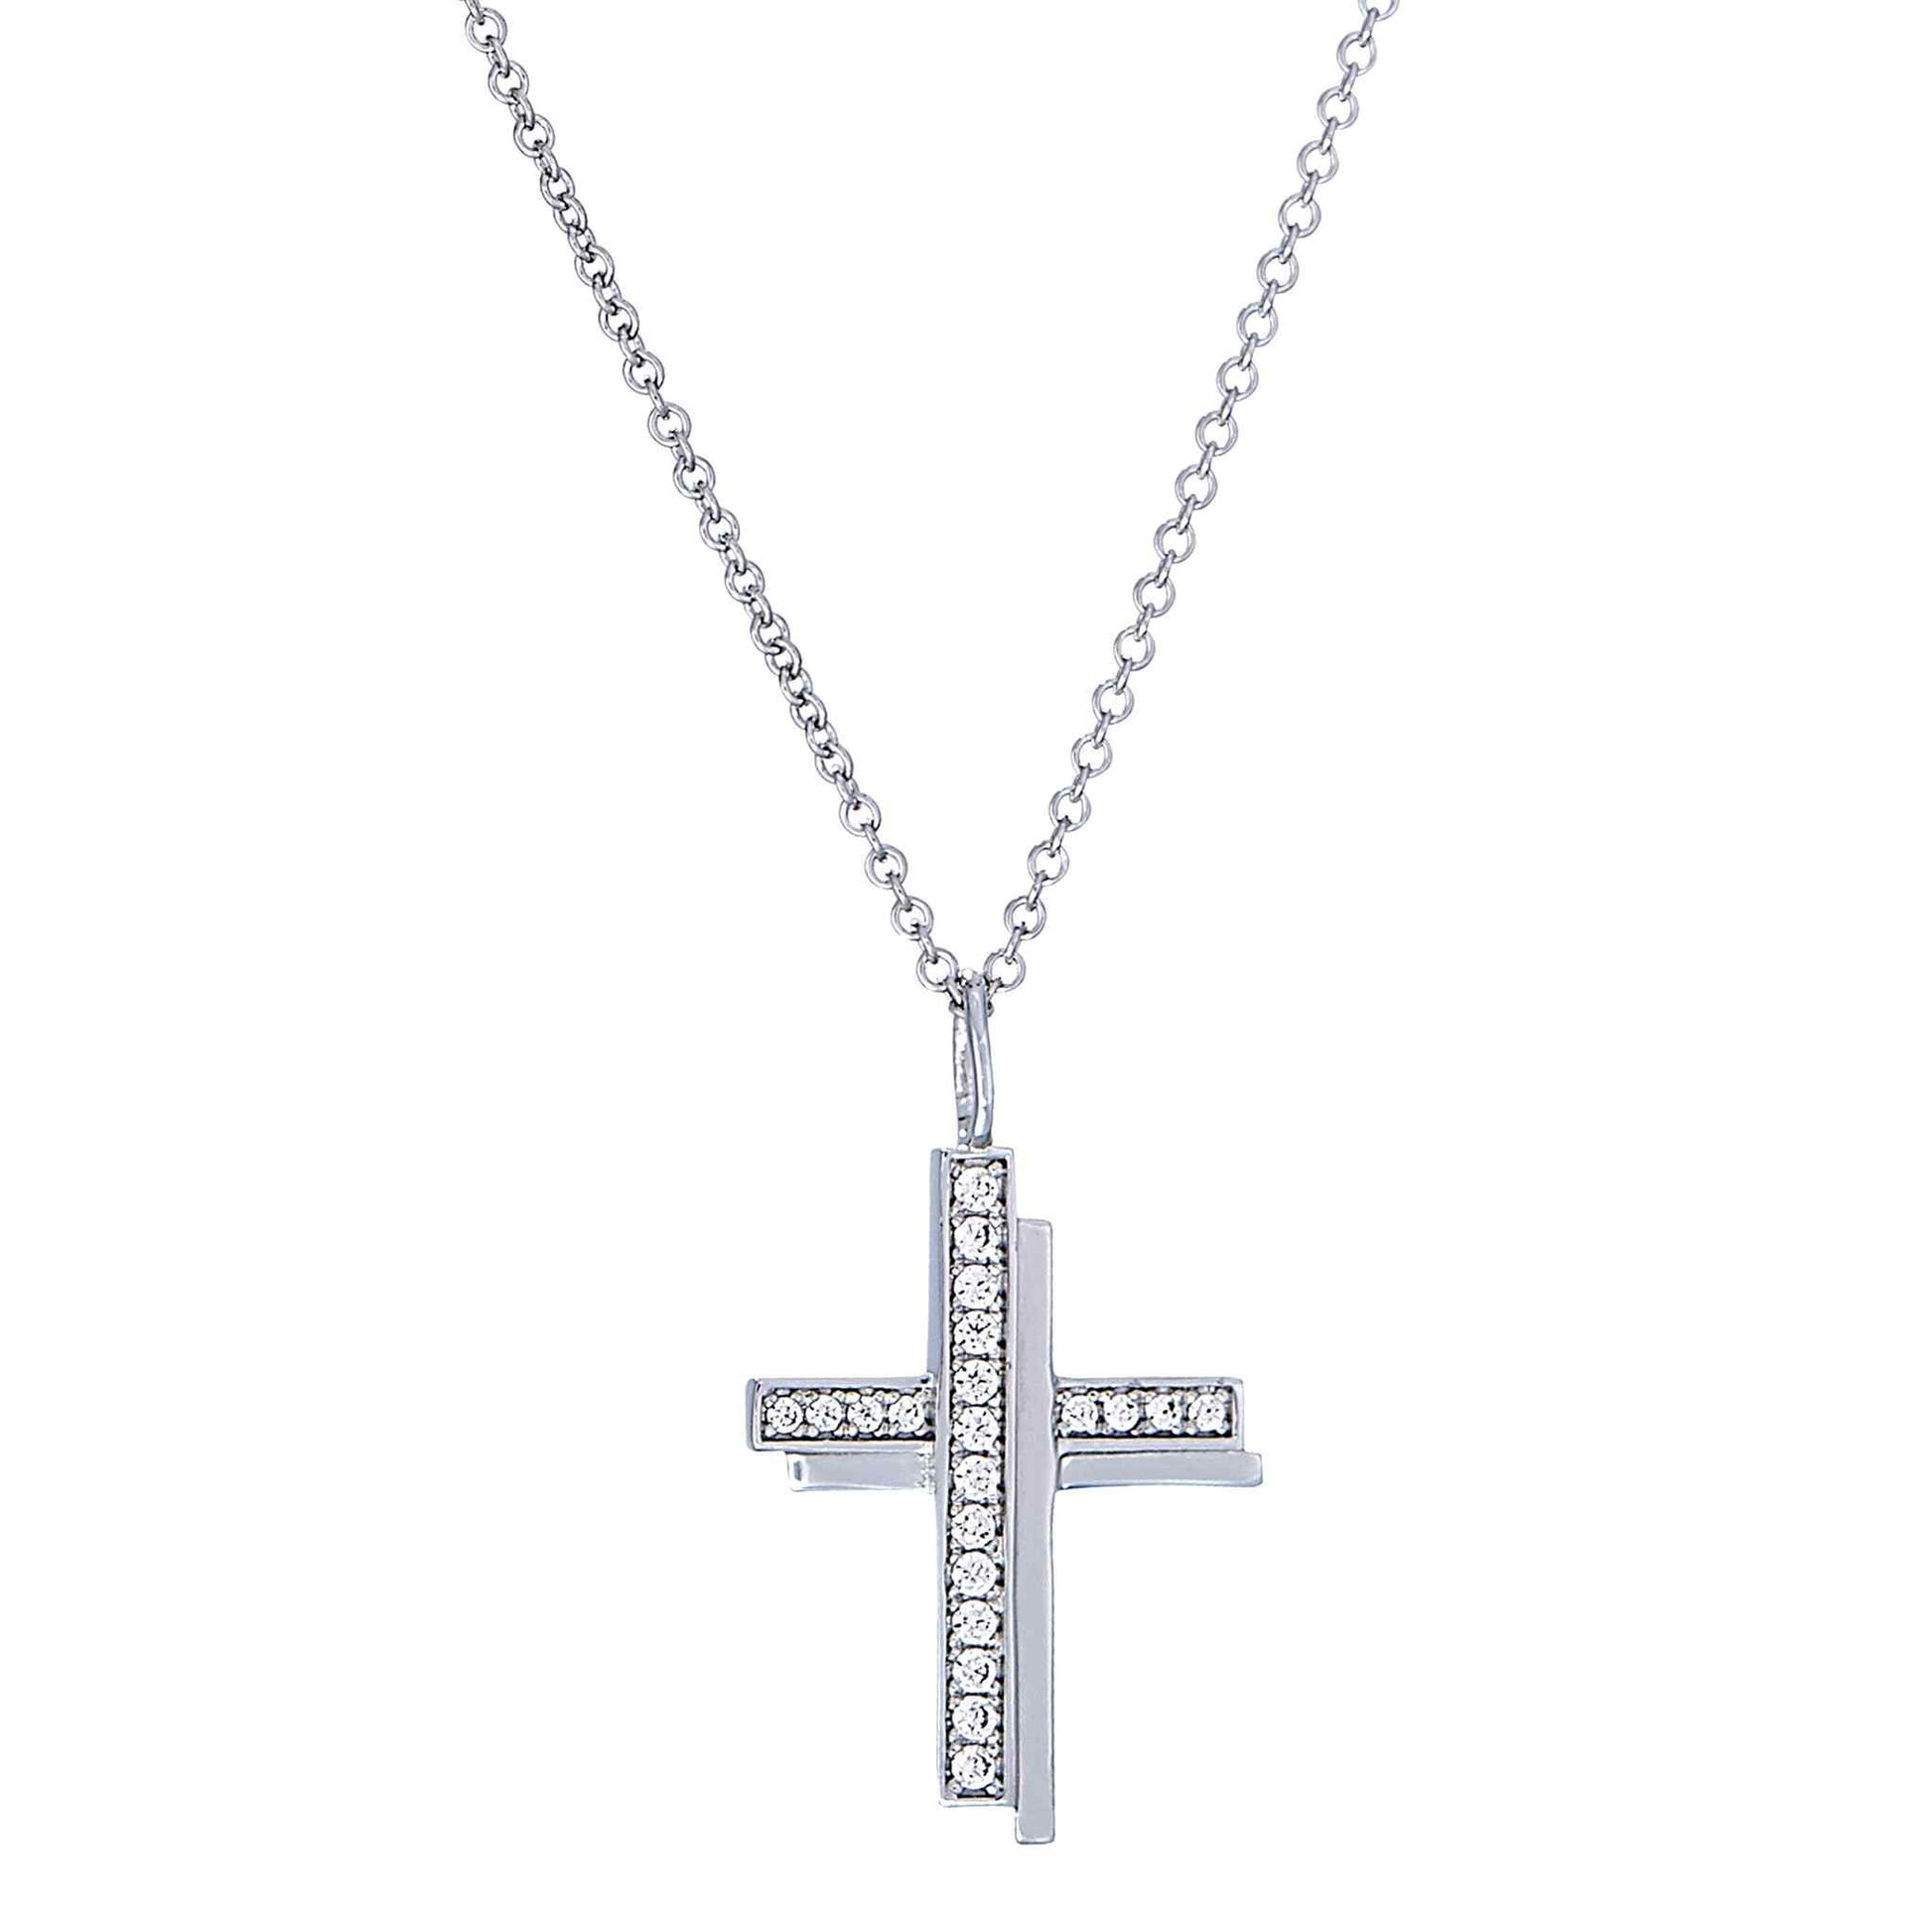 A shadow cross necklace with simulated diamonds displayed on a neutral white background.